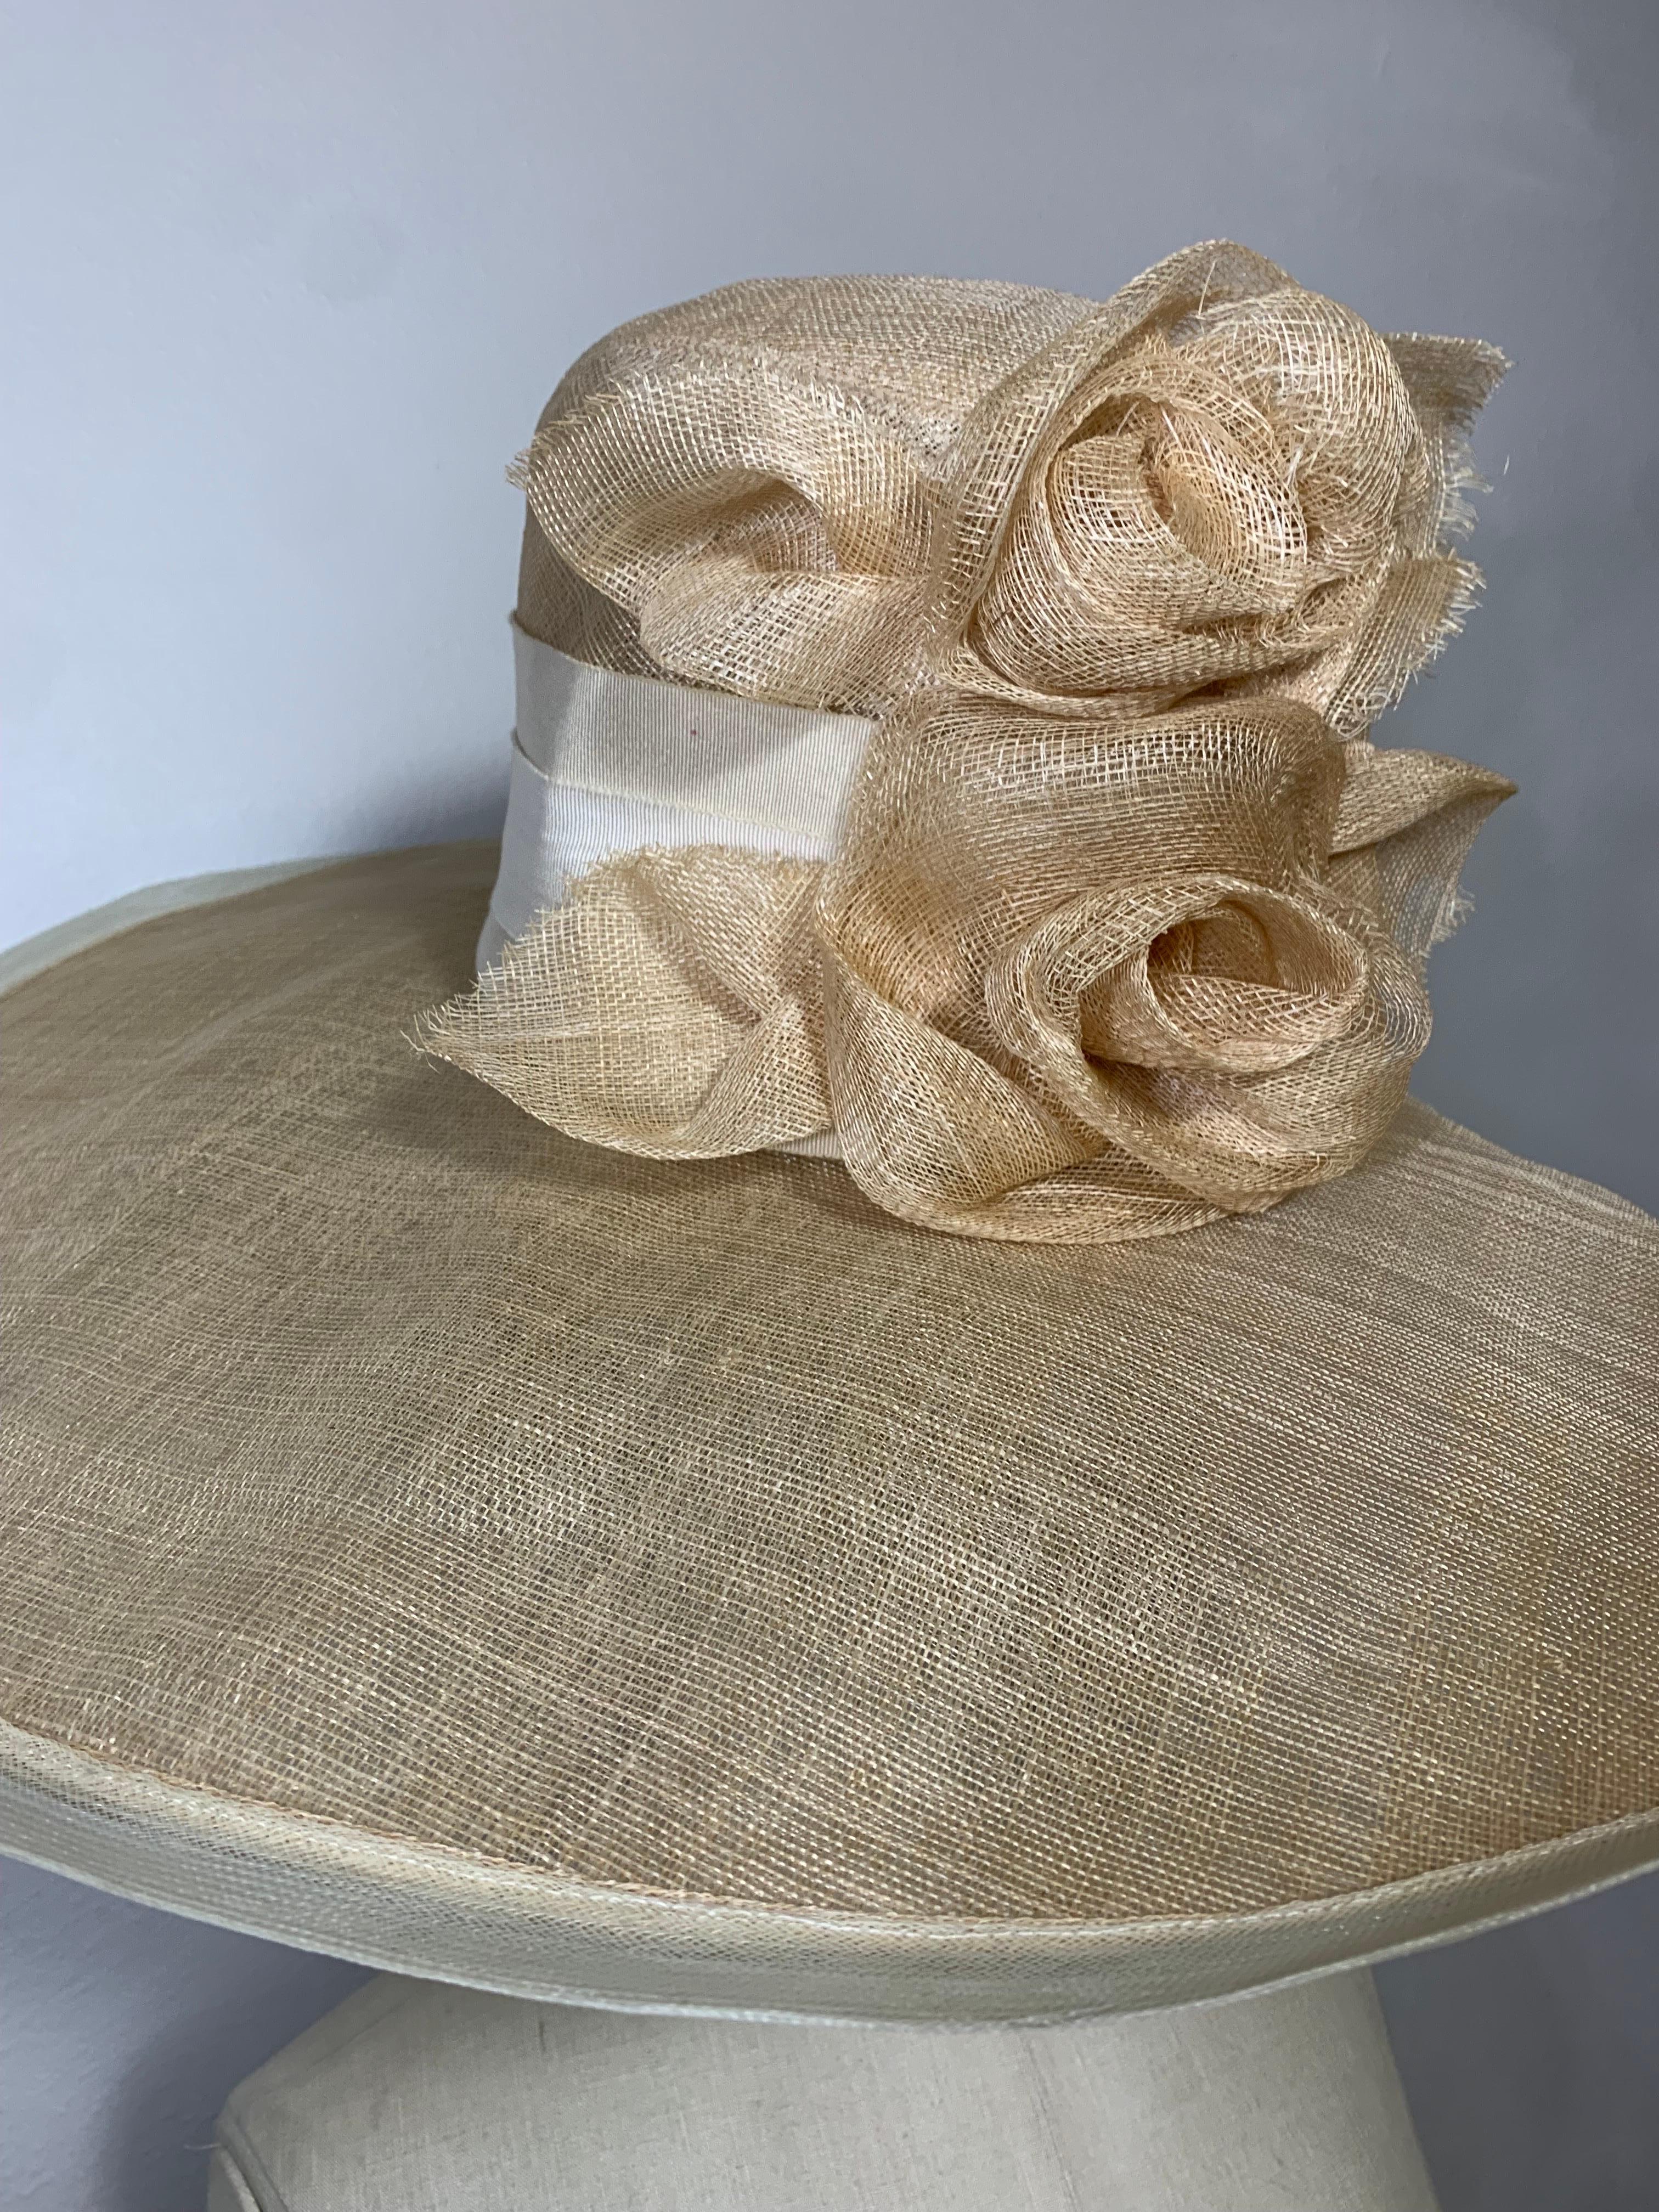 Maison Michel Spring / Summer Natural Wide Brim Straw Hat w Horsehair Braid Trim and Straw Flower Bouquet: Tall body, rounded crown. Wide brim measures 24